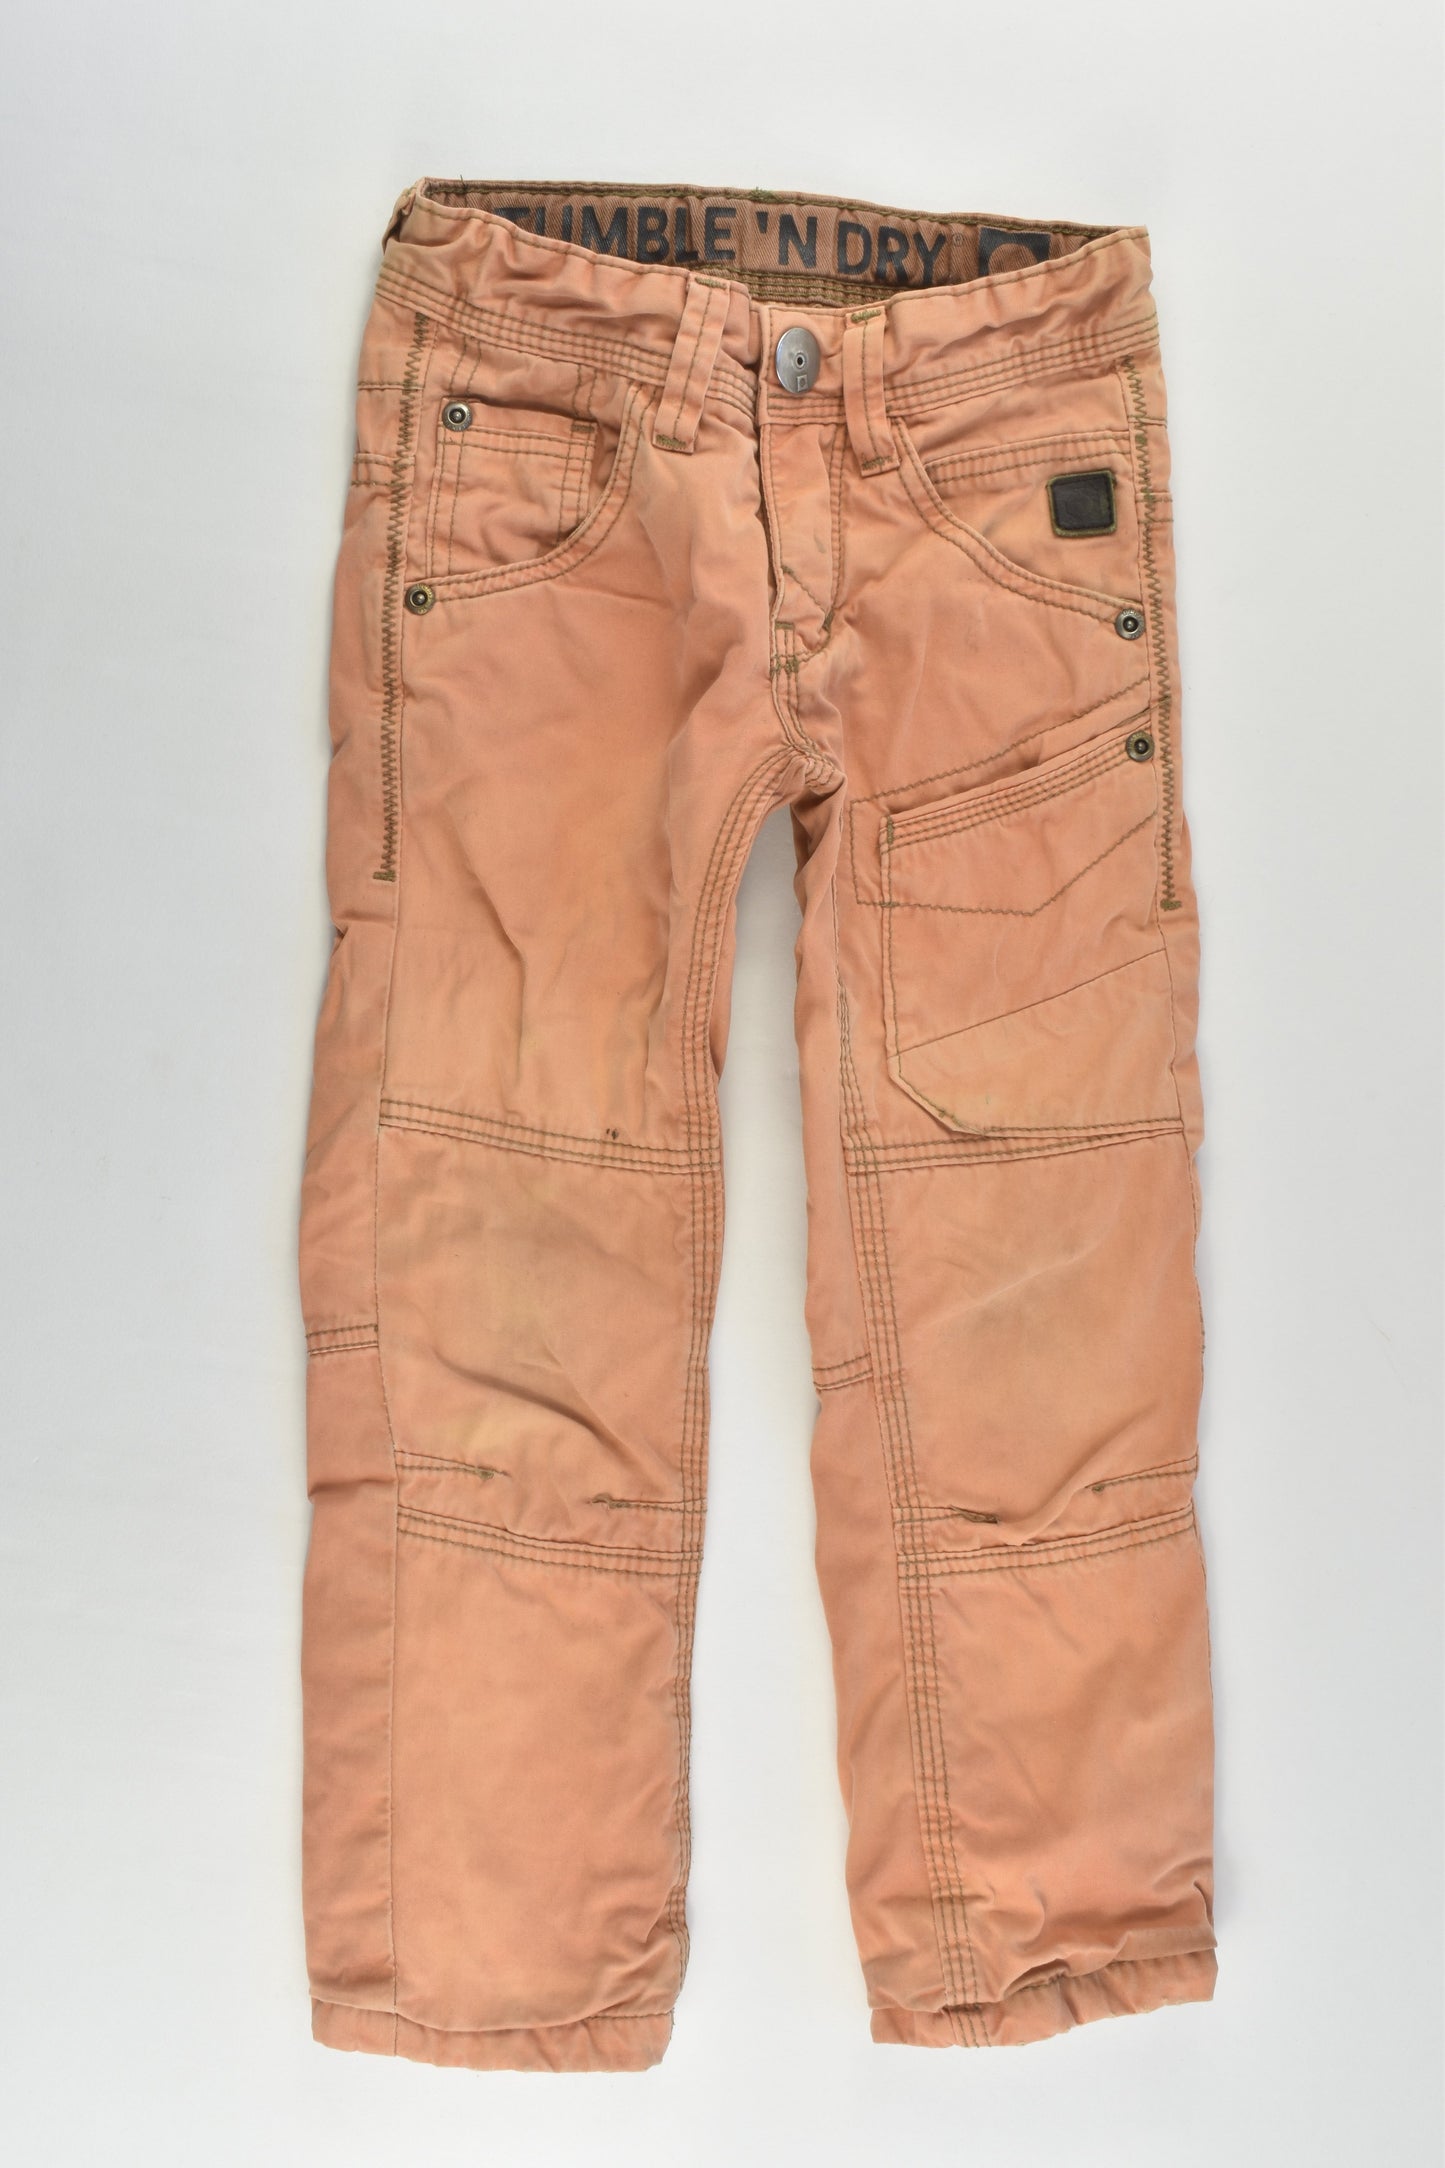 Tumble 'N Dry Size 4 Lined Pants